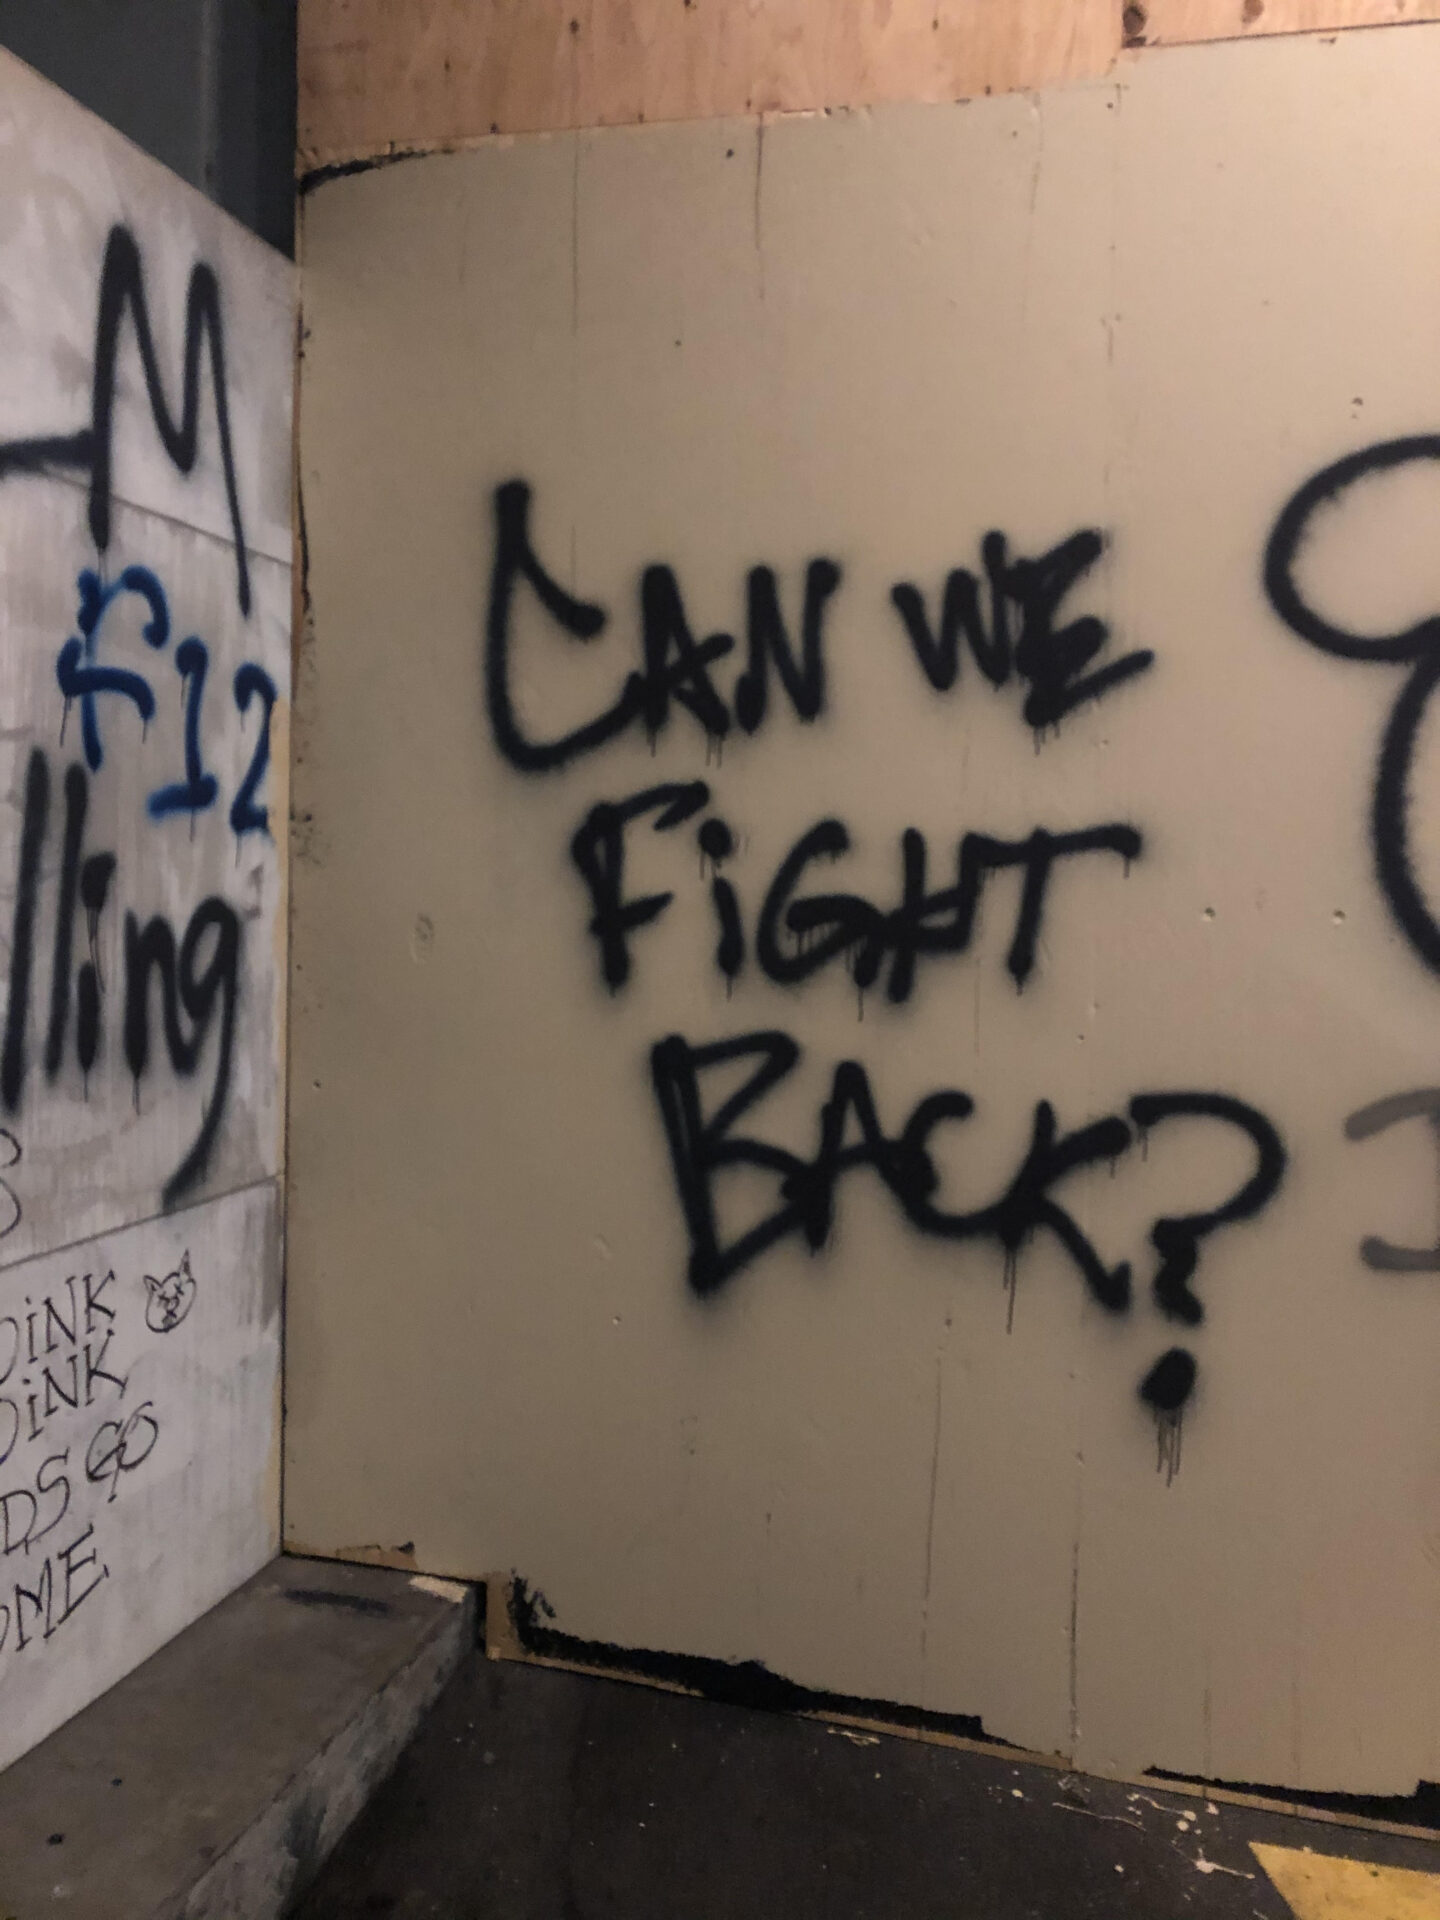 Photograph of the words "Can We Fight Back?" spray painted in black on a beige wall.